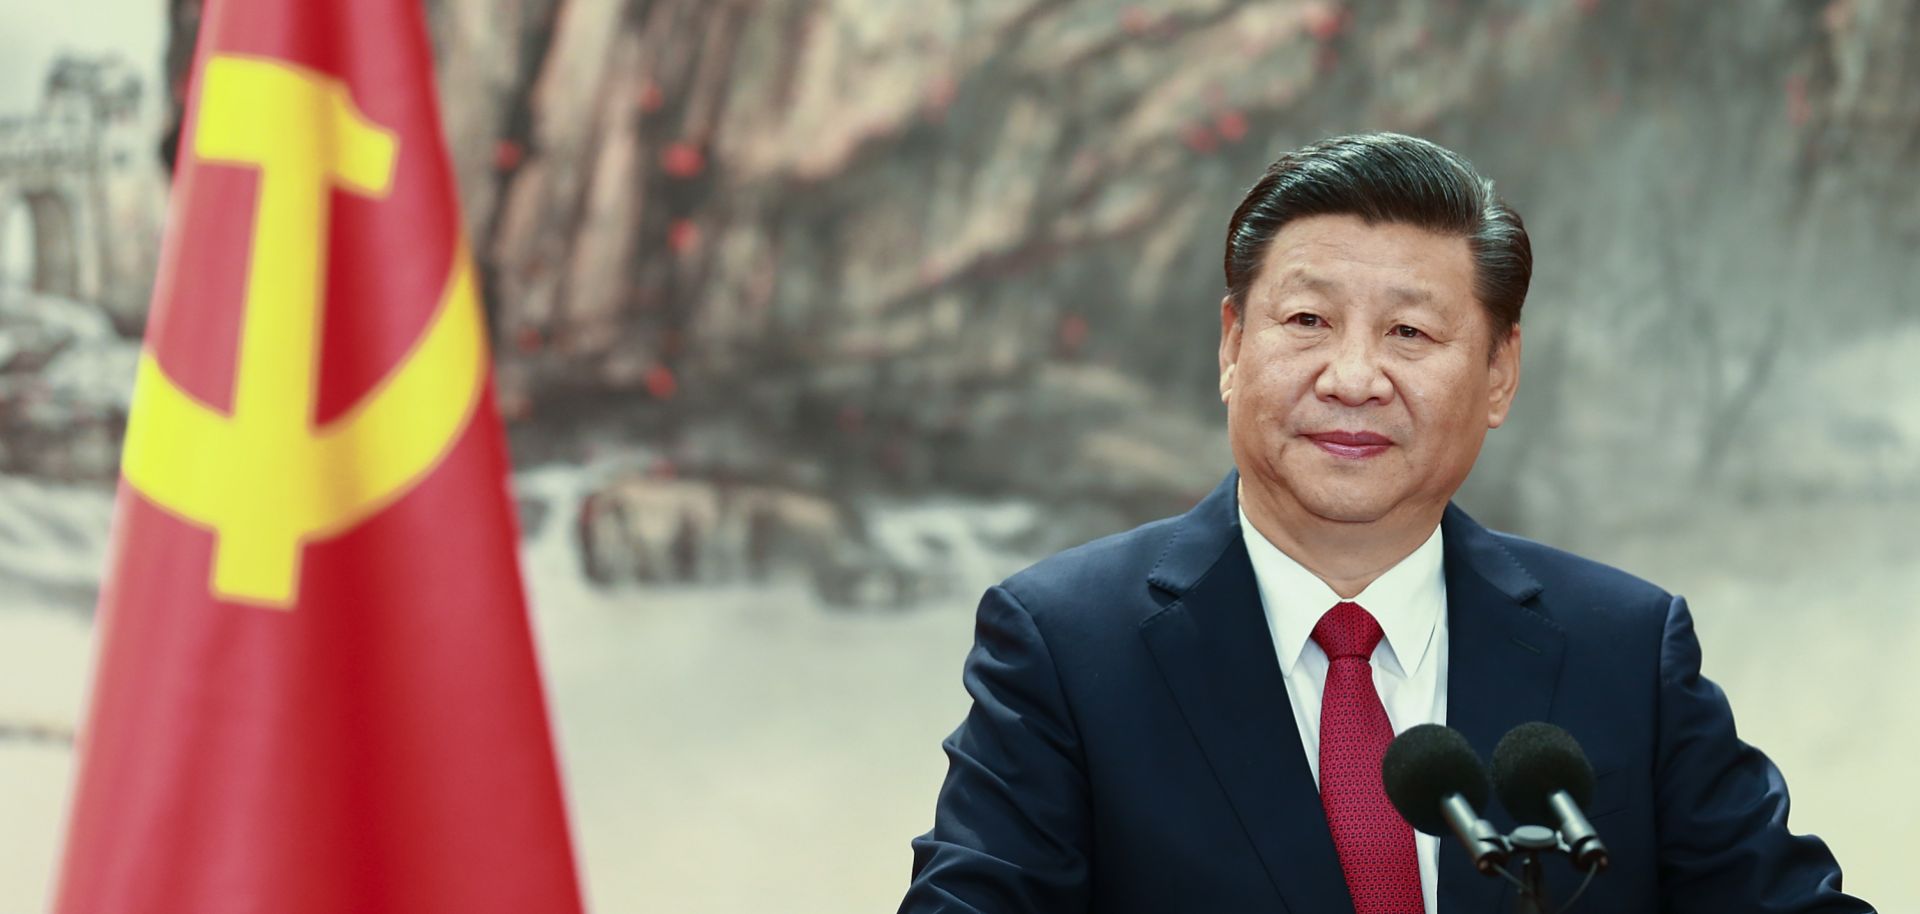 All signs suggest Chinese President Xi Jinping, shown here during the introduction of the Communist Party's new Politburo Standing Committee on Oct. 25, will be leading China for many years to come.